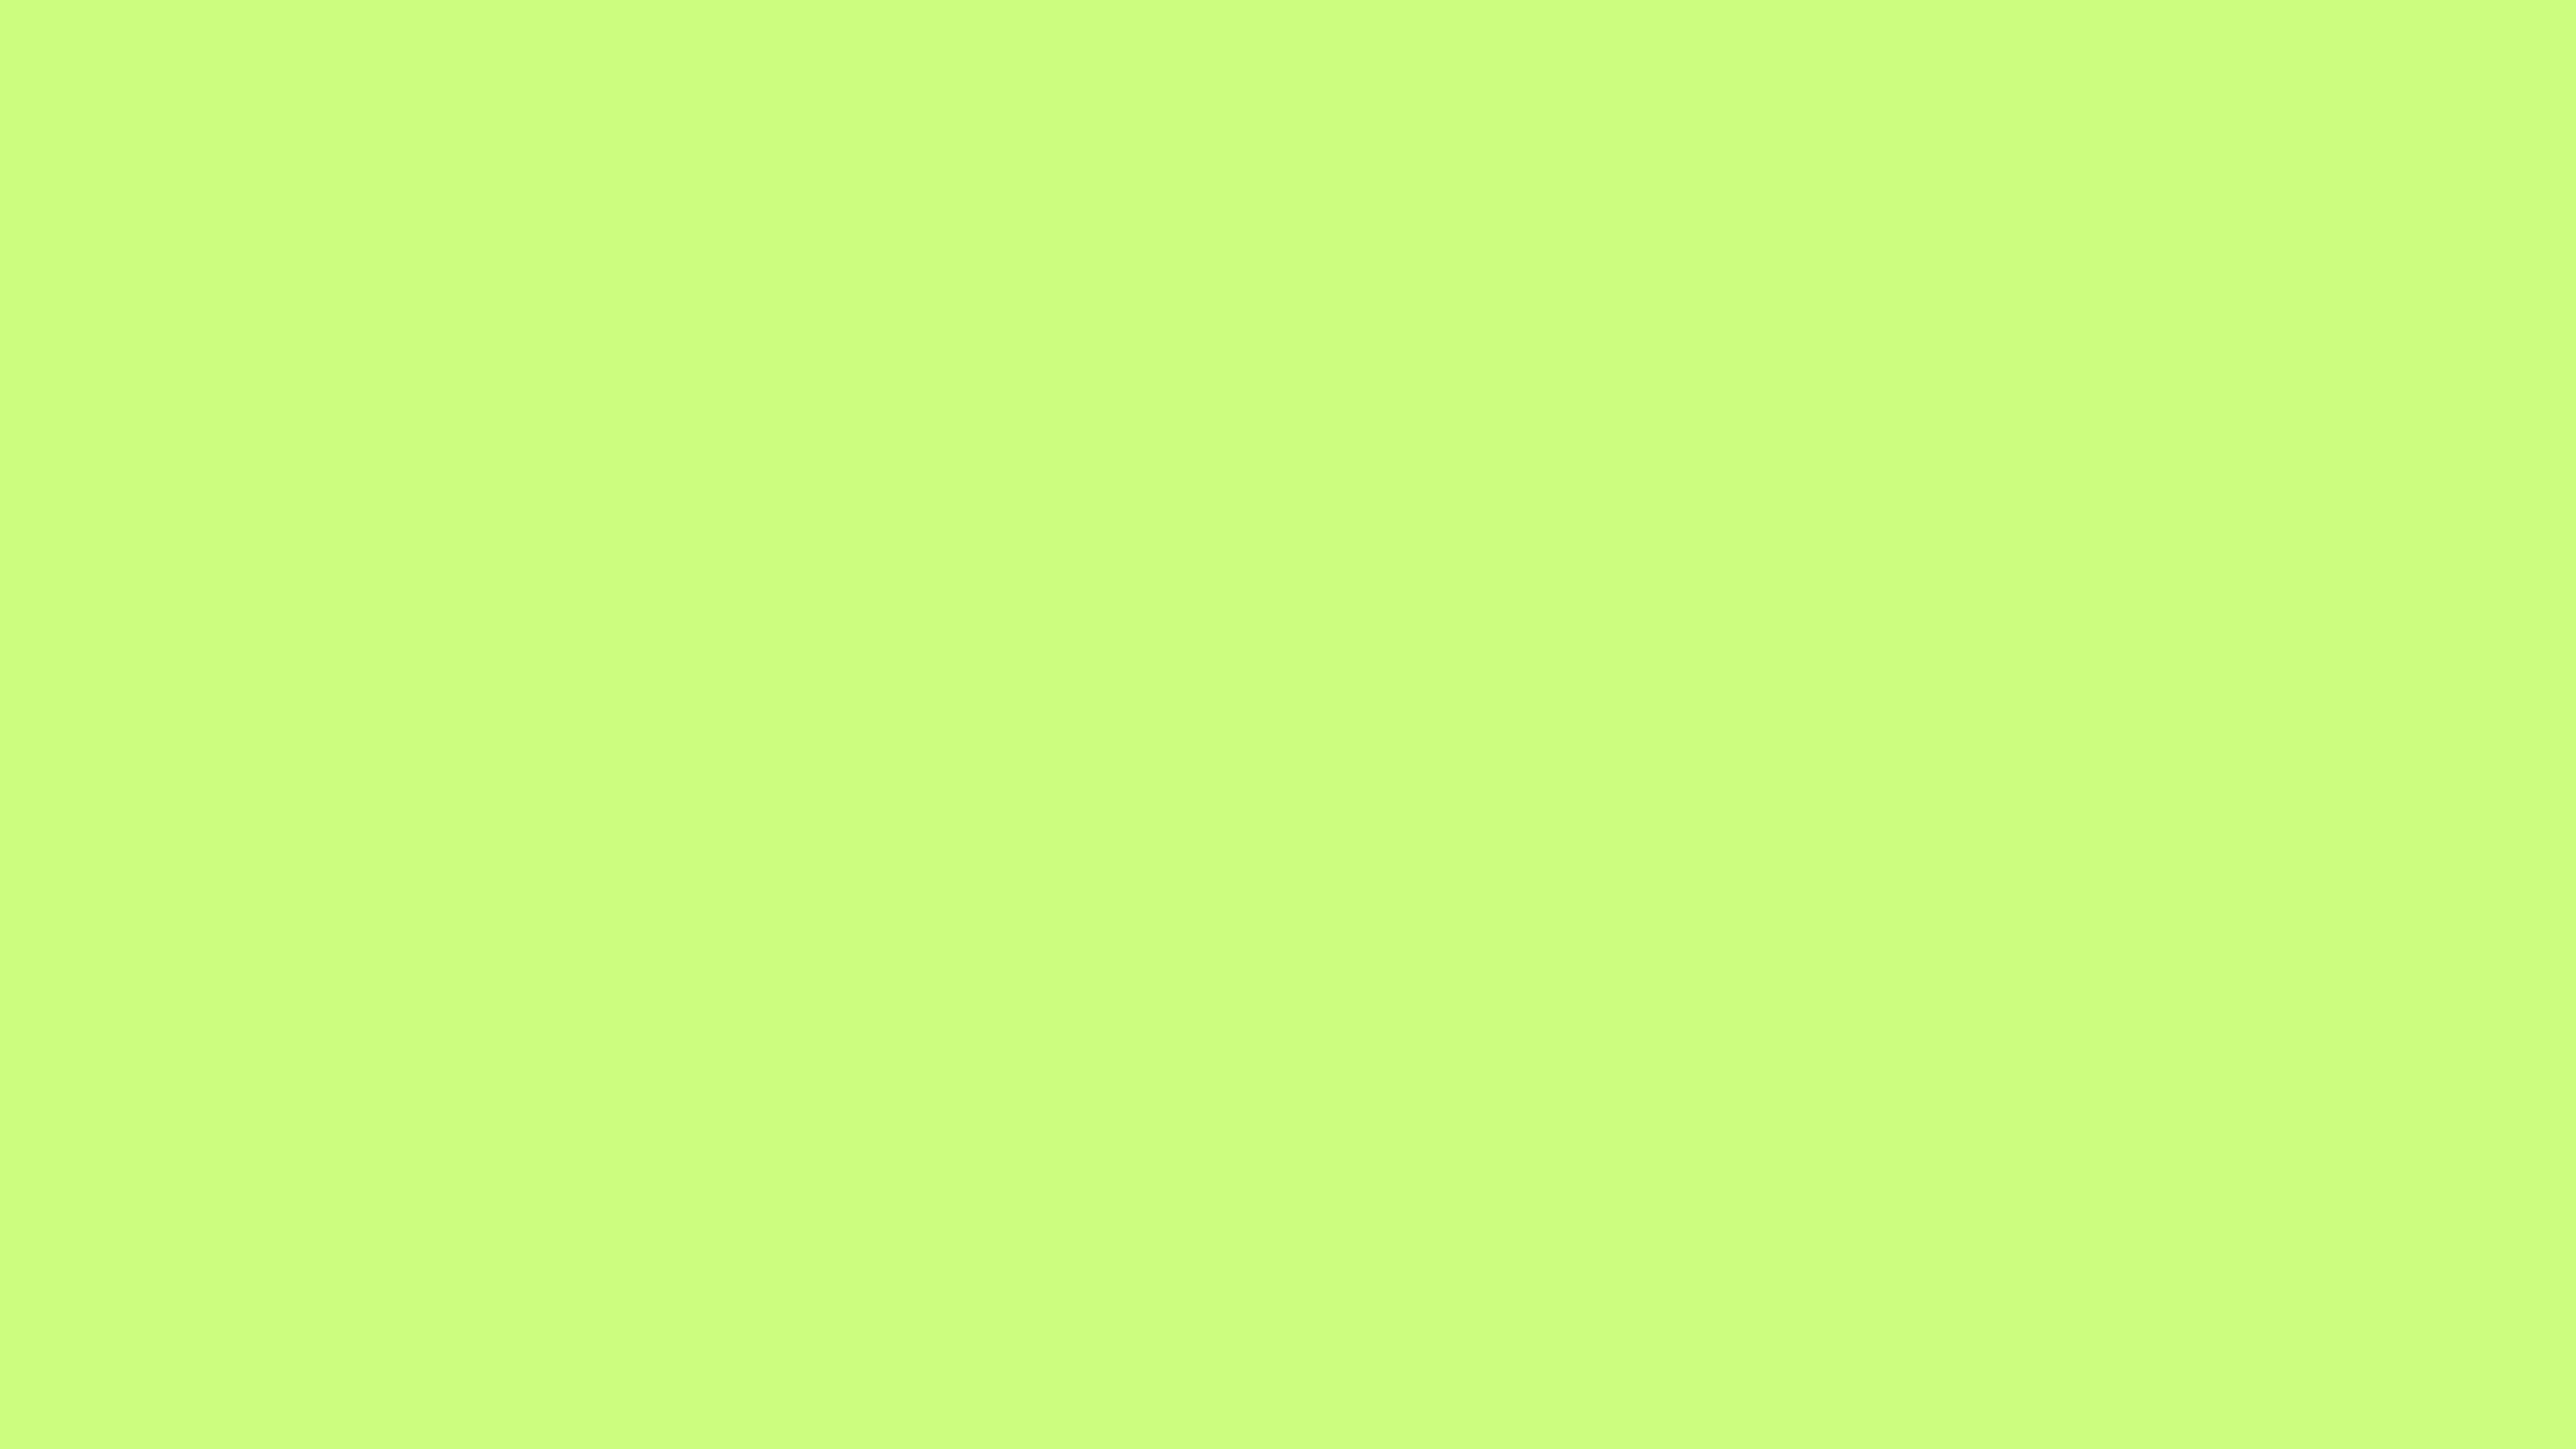 Light Yellow Green Solid Color Background Image | Free Image Generator